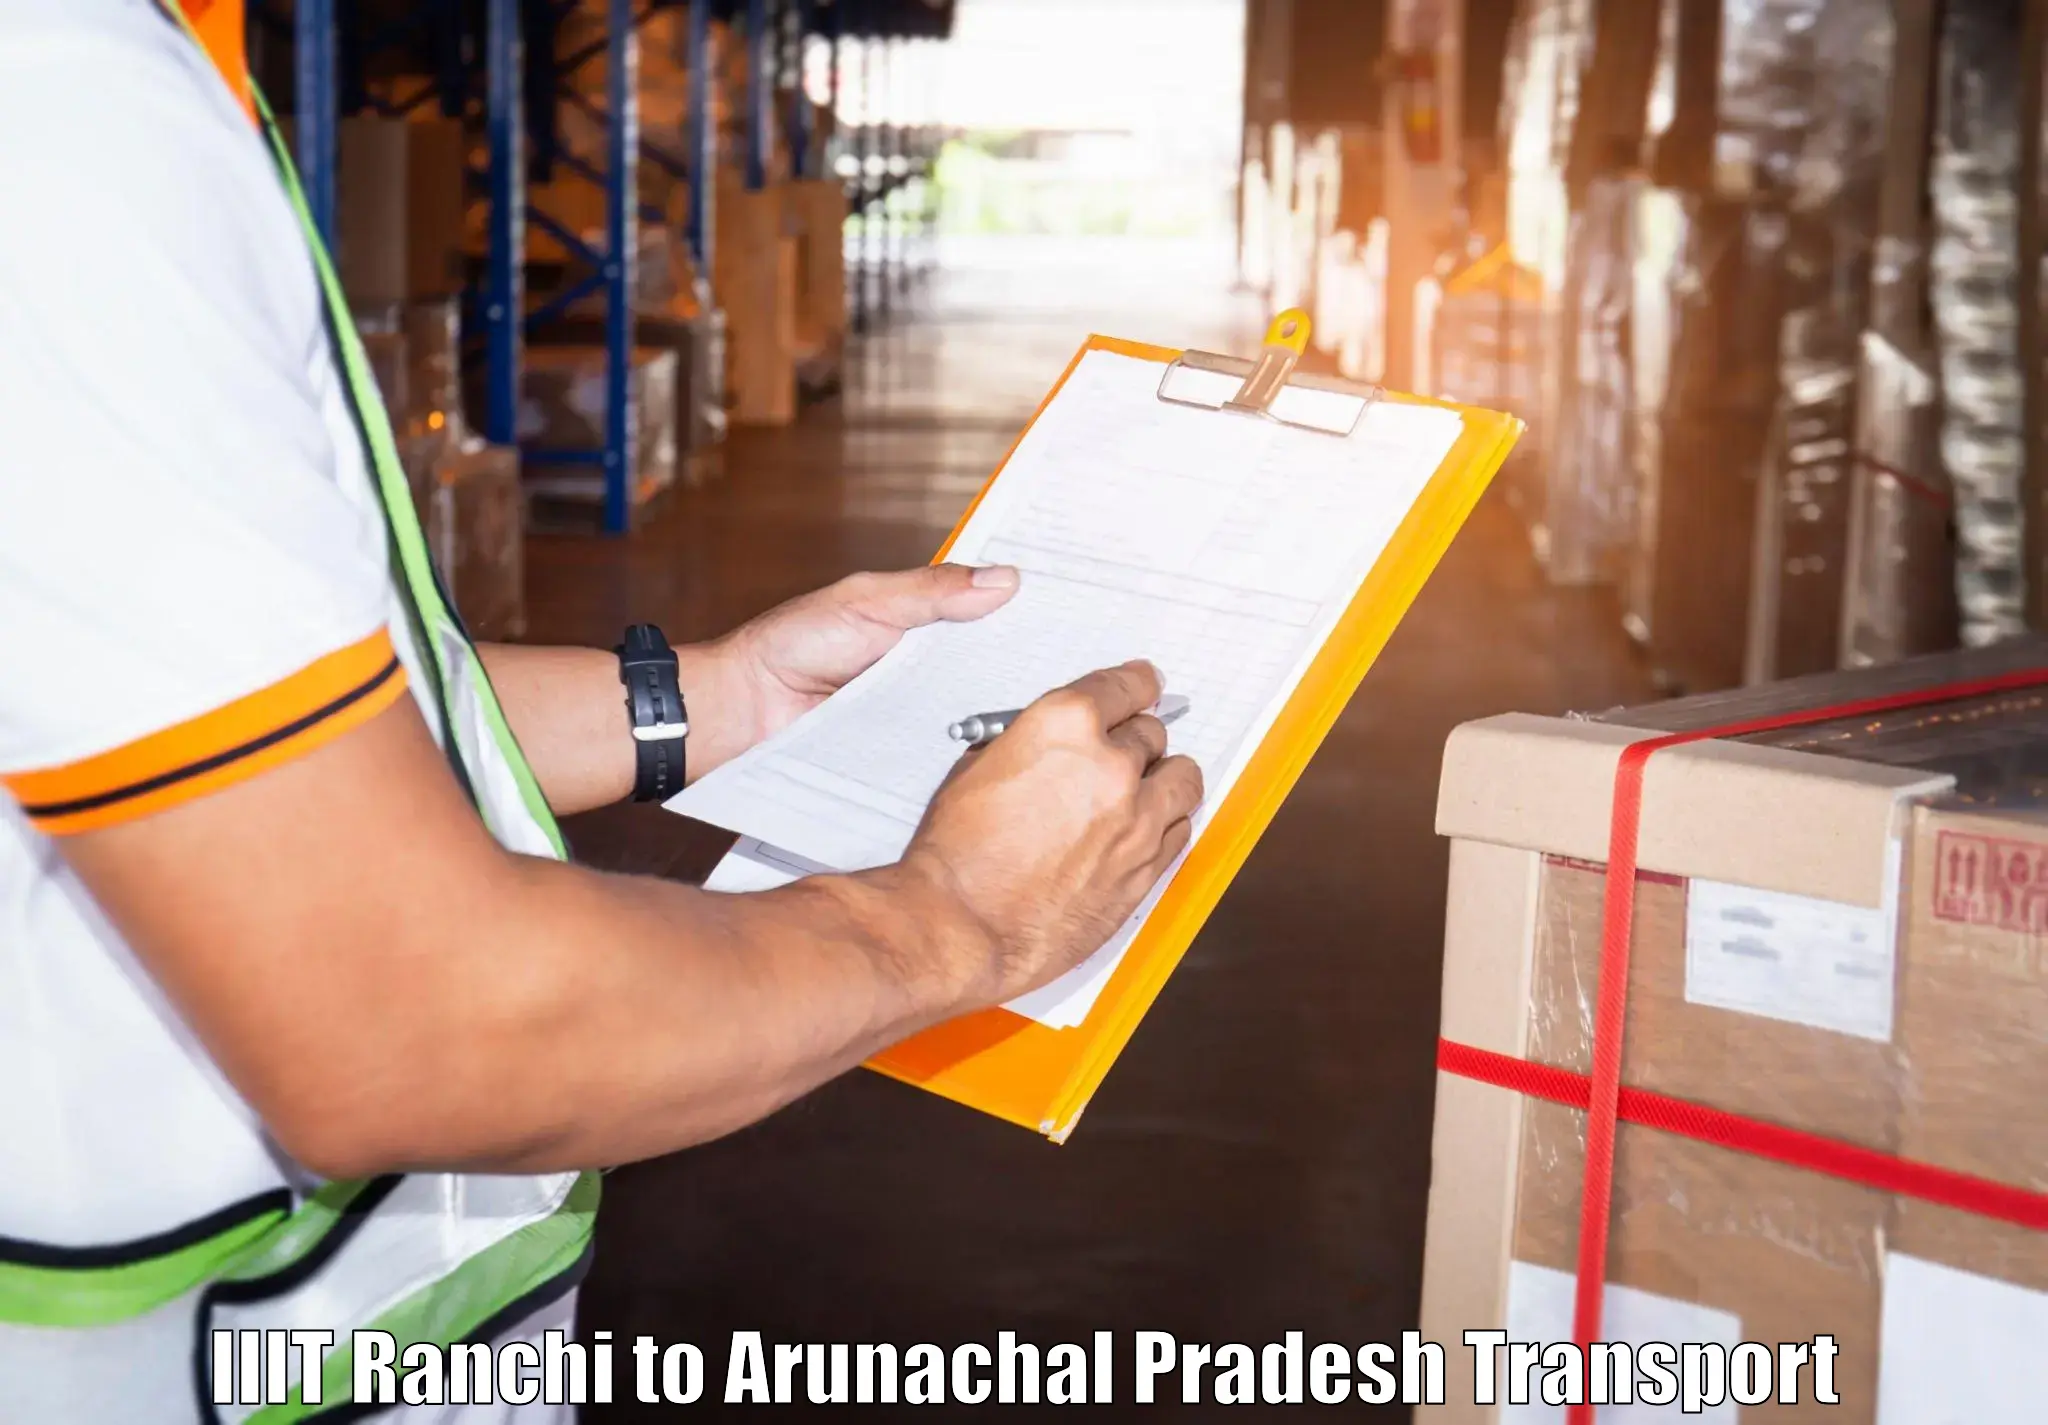 Pick up transport service in IIIT Ranchi to Deomali